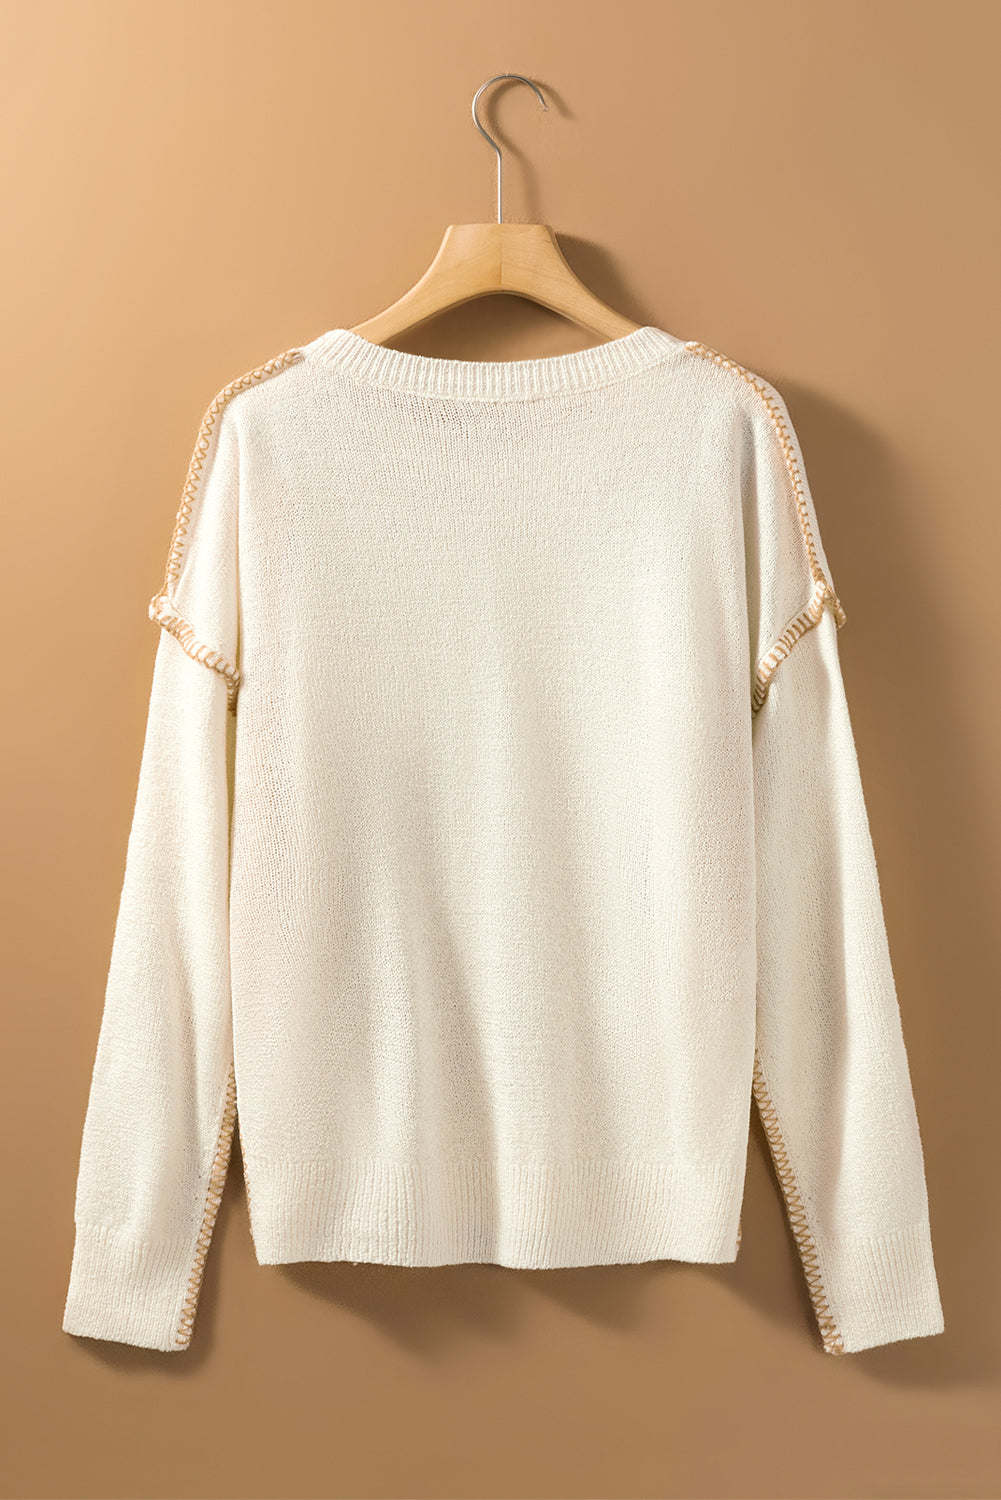 Beige Exposed Stitching Chest Pocket Drop Shoulder Sweater